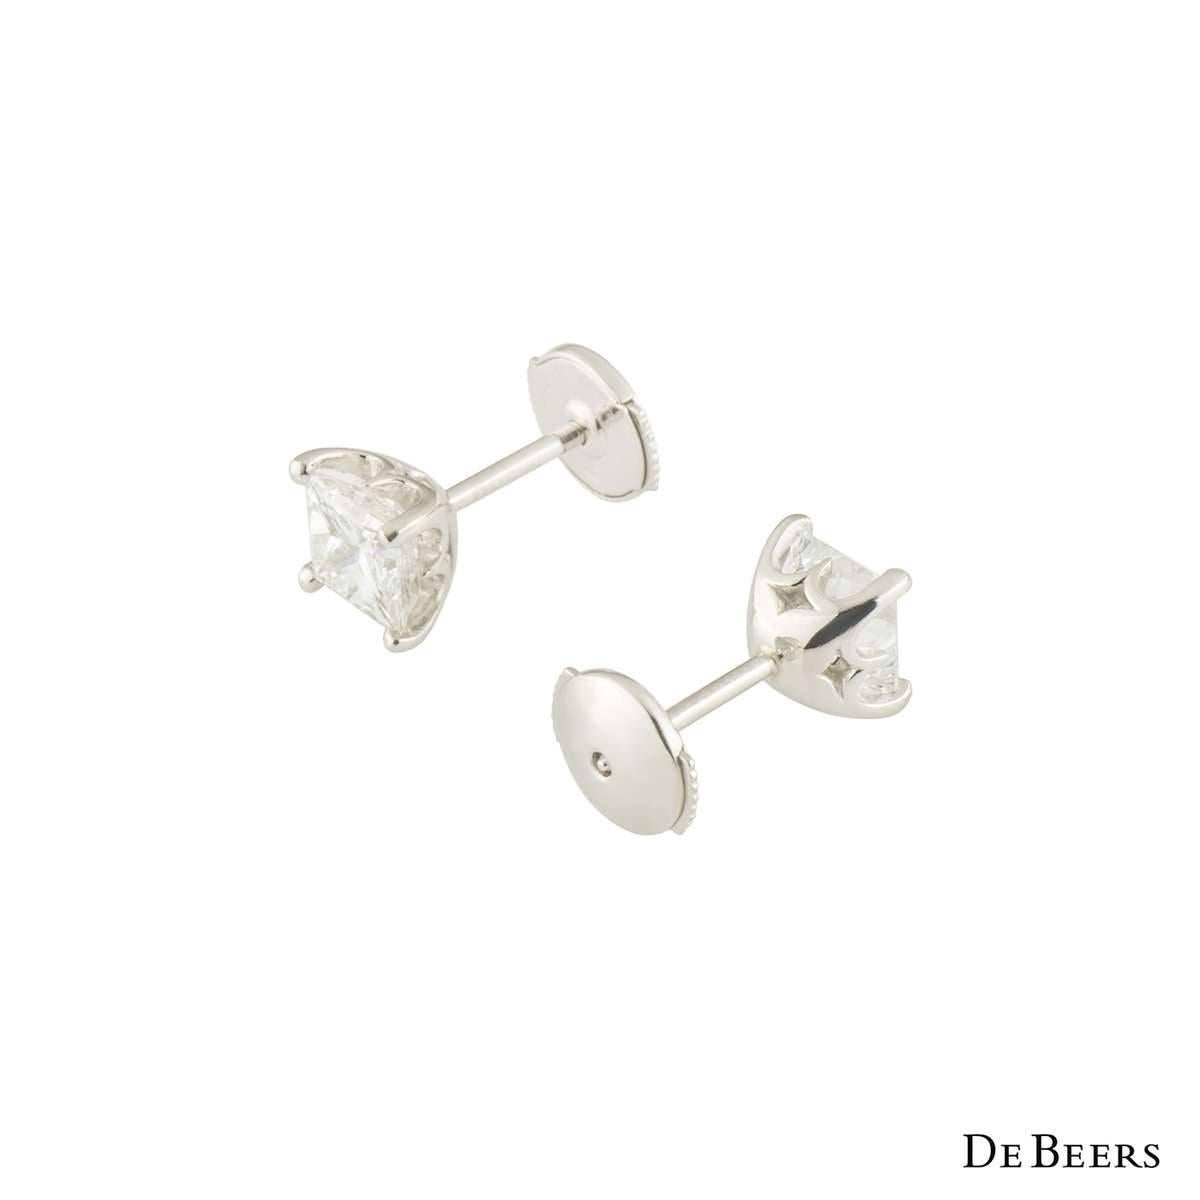 A beautiful pair of platinum De Beers diamond stud earrings from the Classic Princess Cut collection. Each earring features a princess cut diamond in a 4 claw setting. The first earring has a weight of 1.03ct and the second earring has a weight of